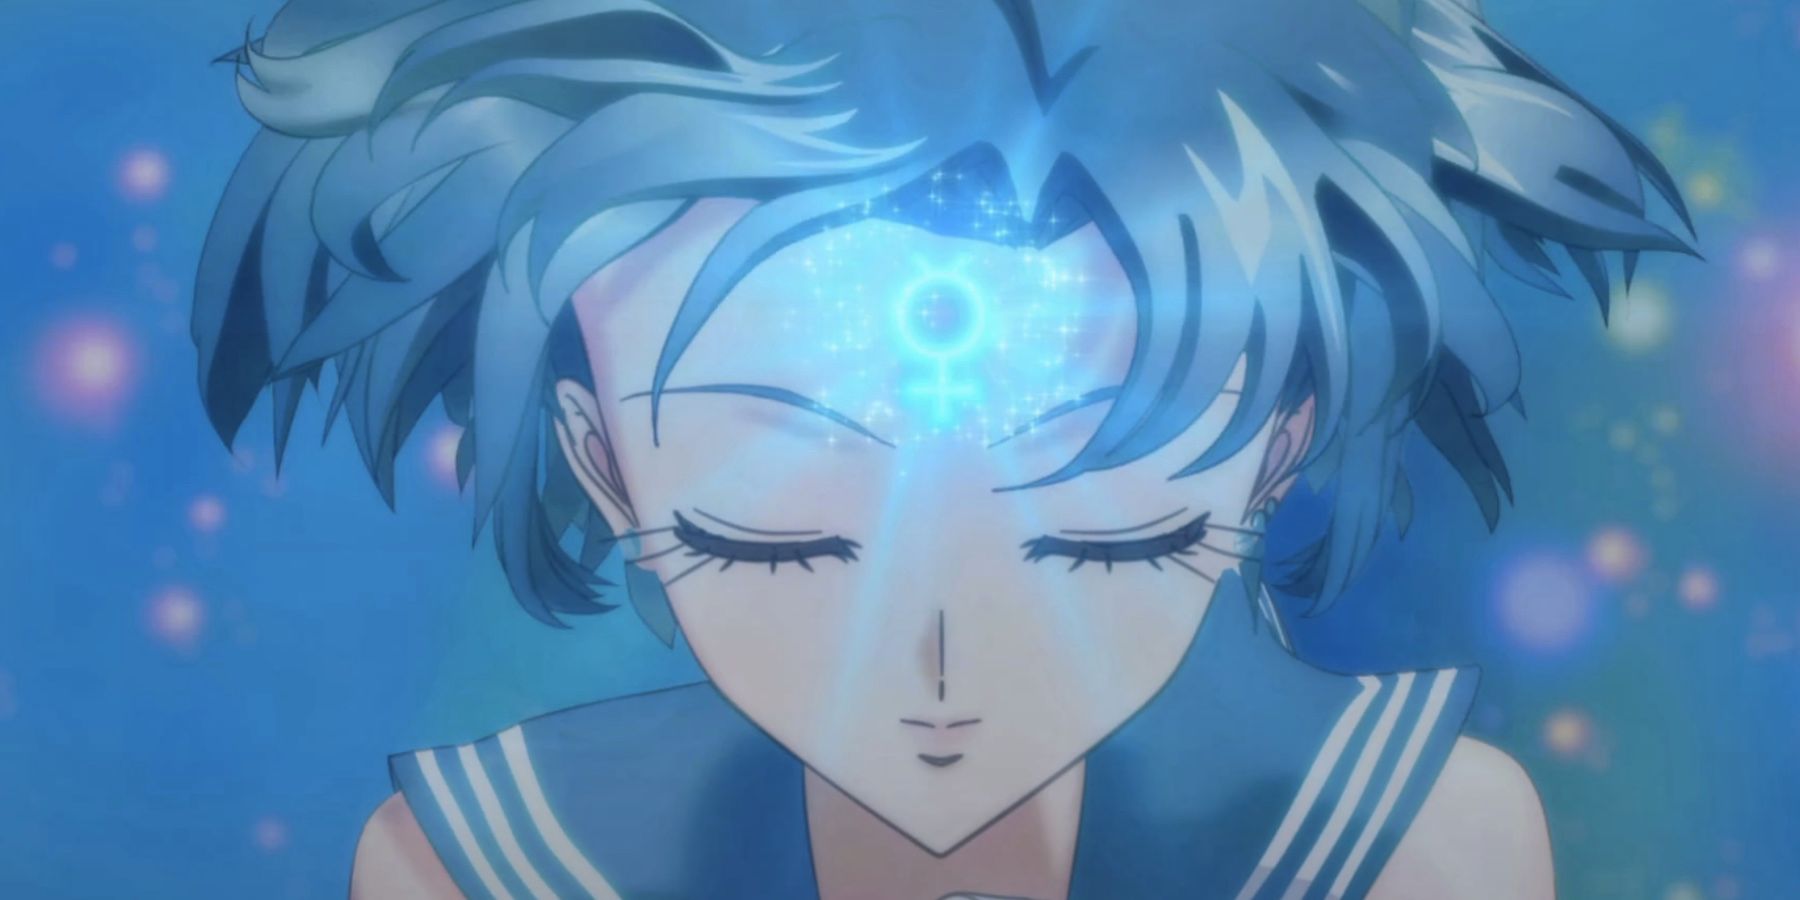 Ami has the Mercury symbol on her forehead when she transforms in Sailor Moon